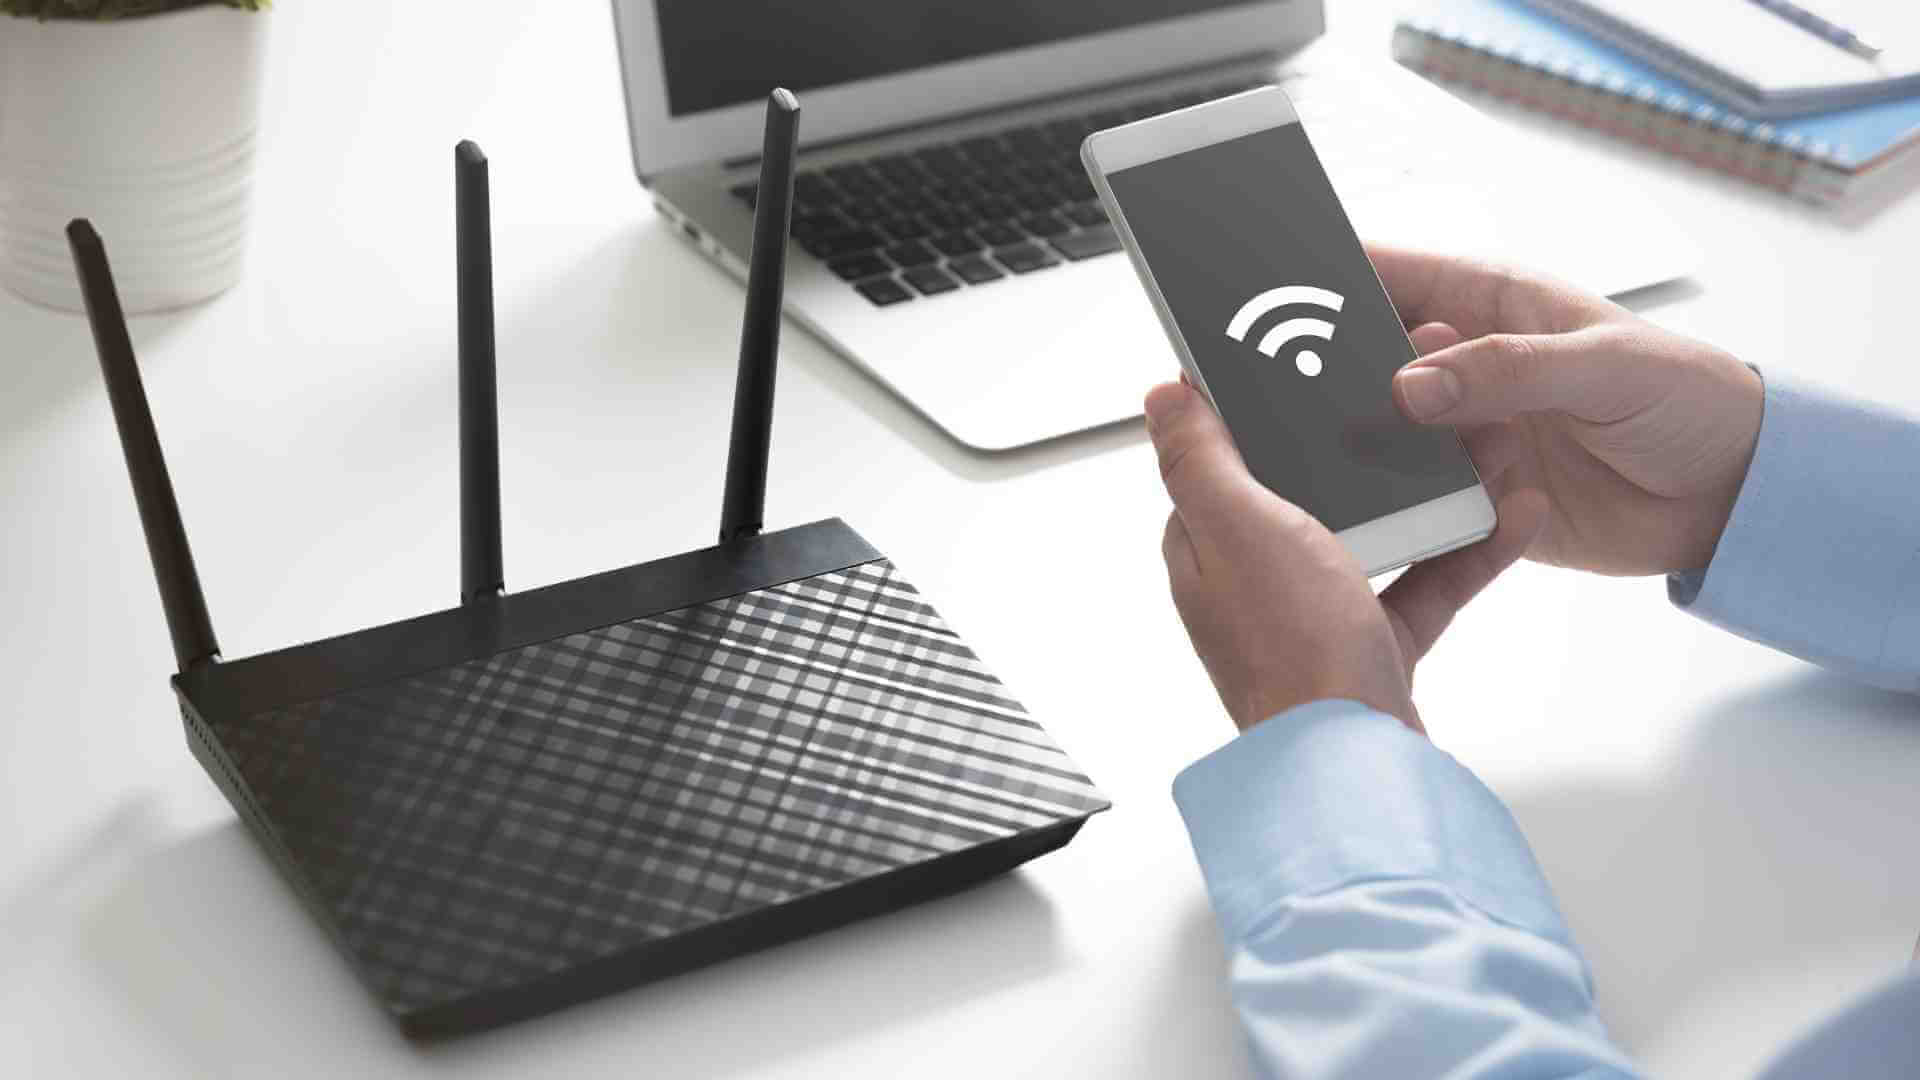 Default Settings Of Your Router